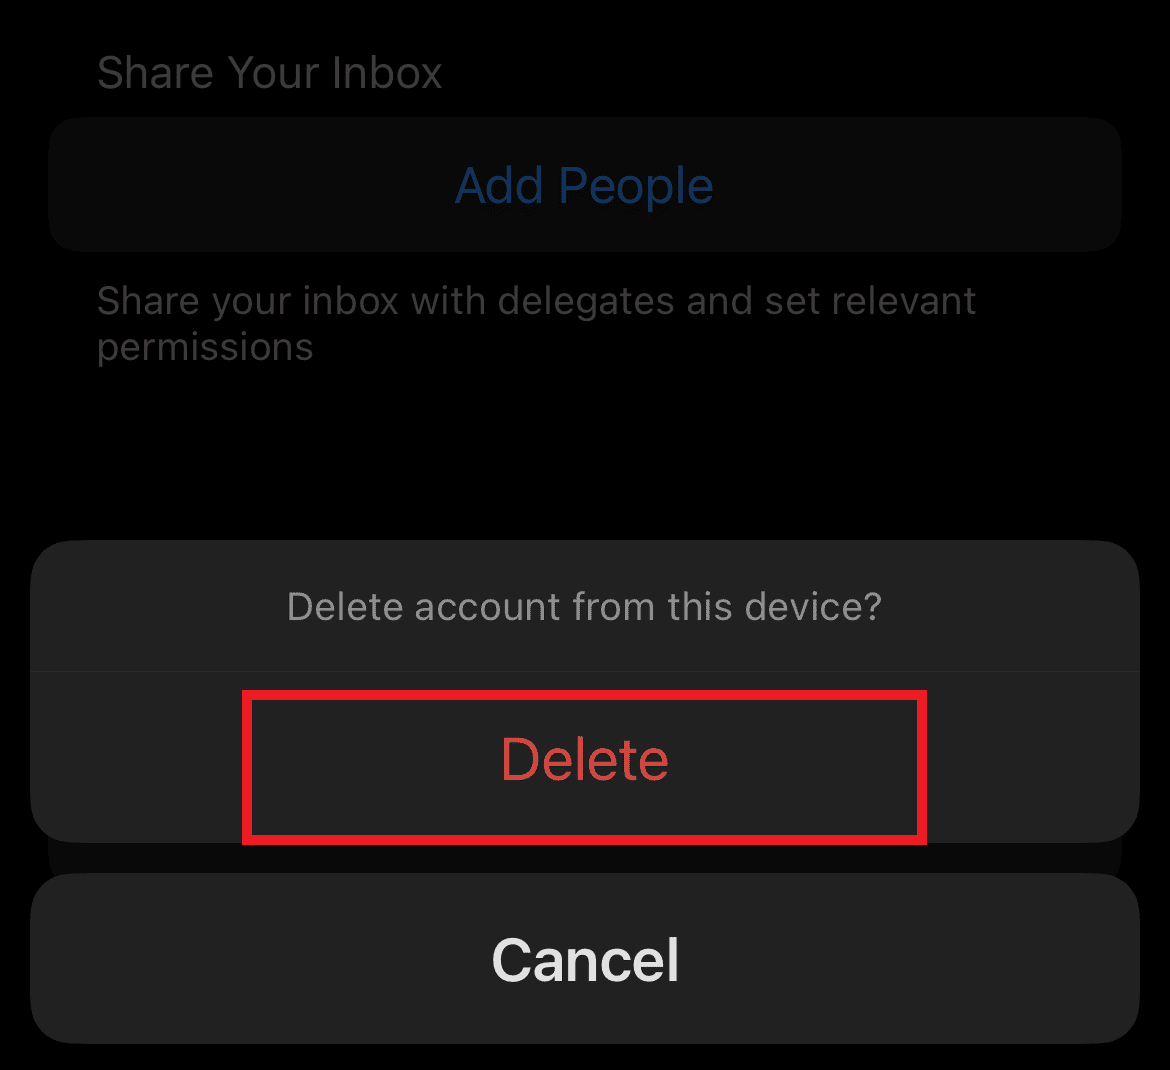 Tap on Delete in the confirmation popup